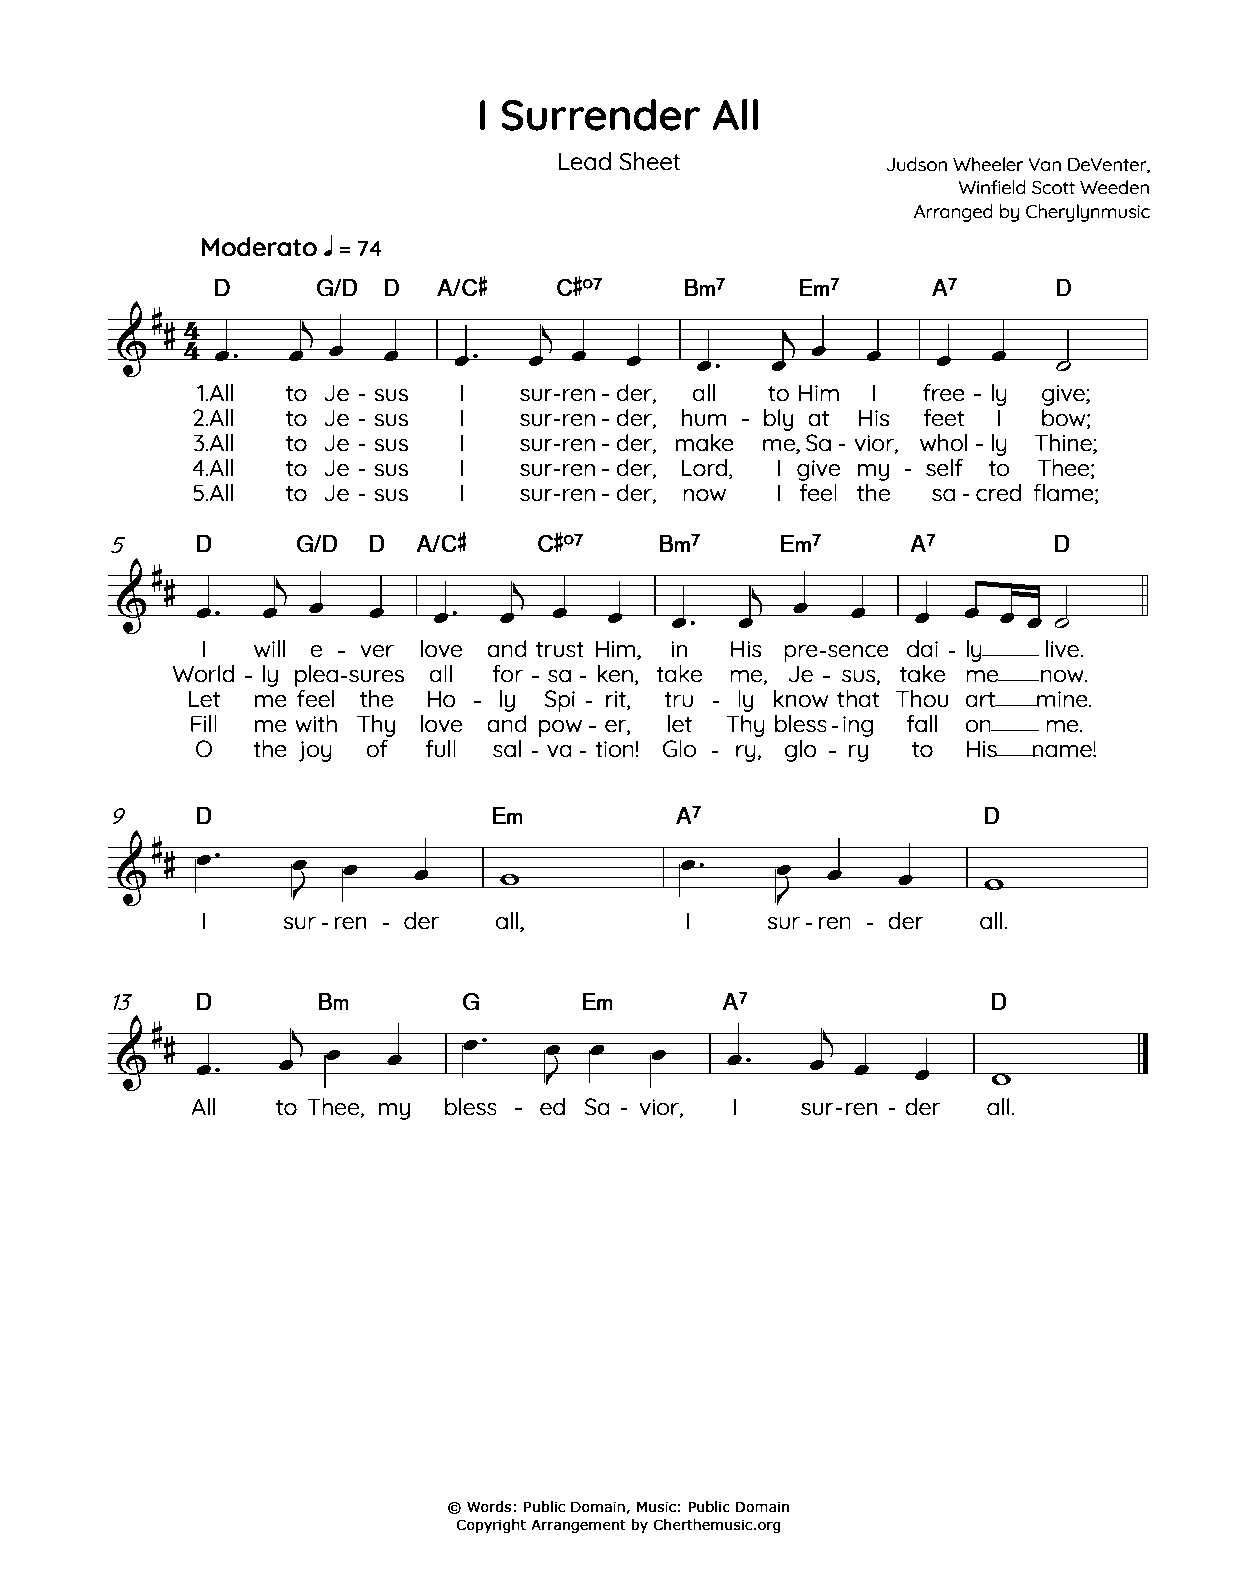 "I Surrender All" lead sheet preview